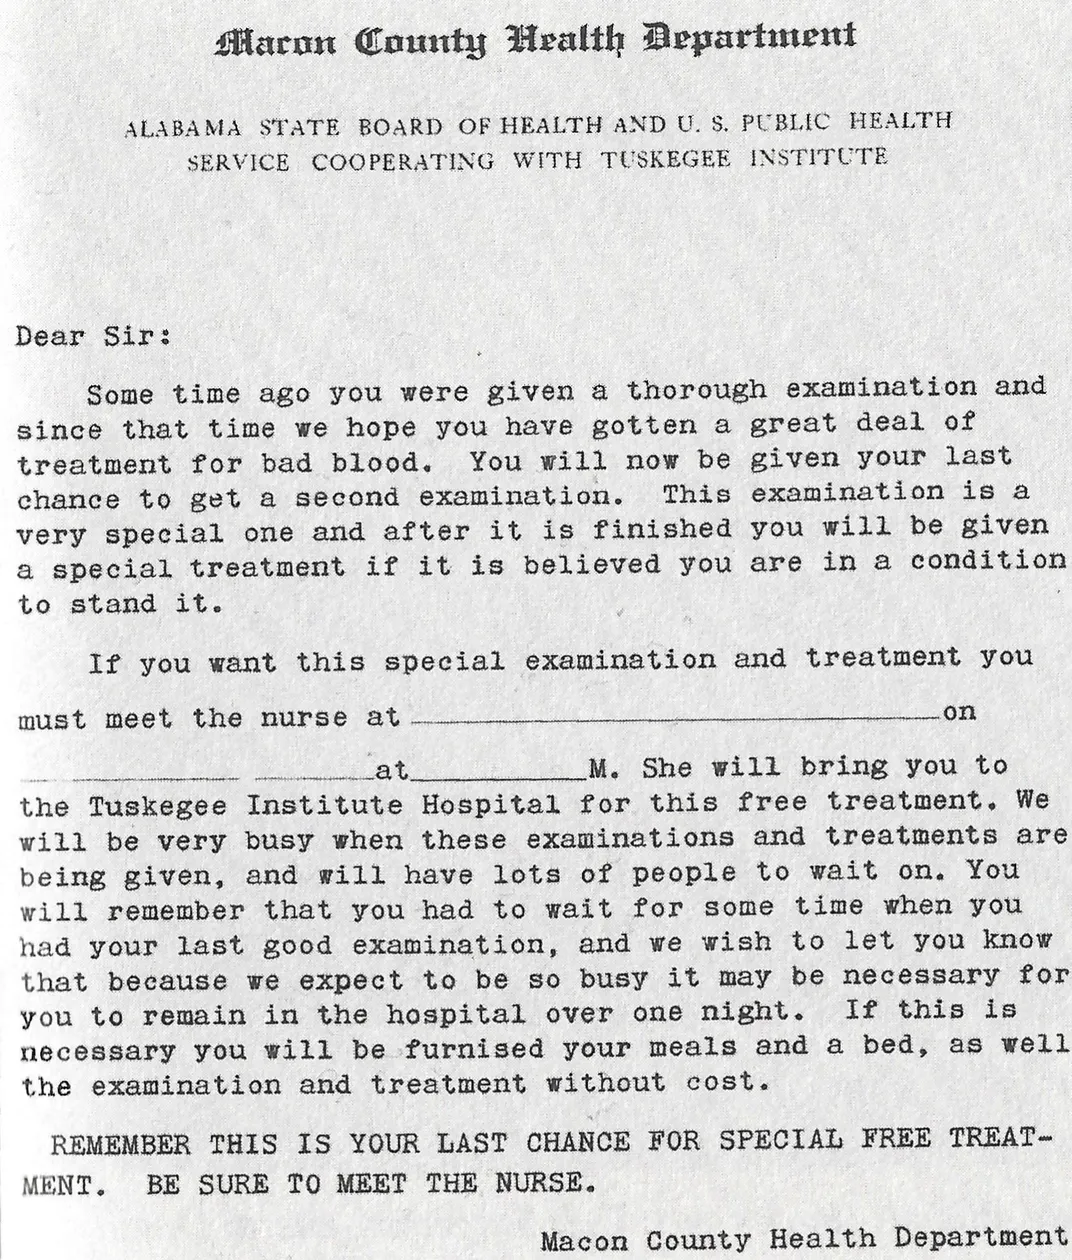 Letter inviting participants in the study to undergo a special treatment